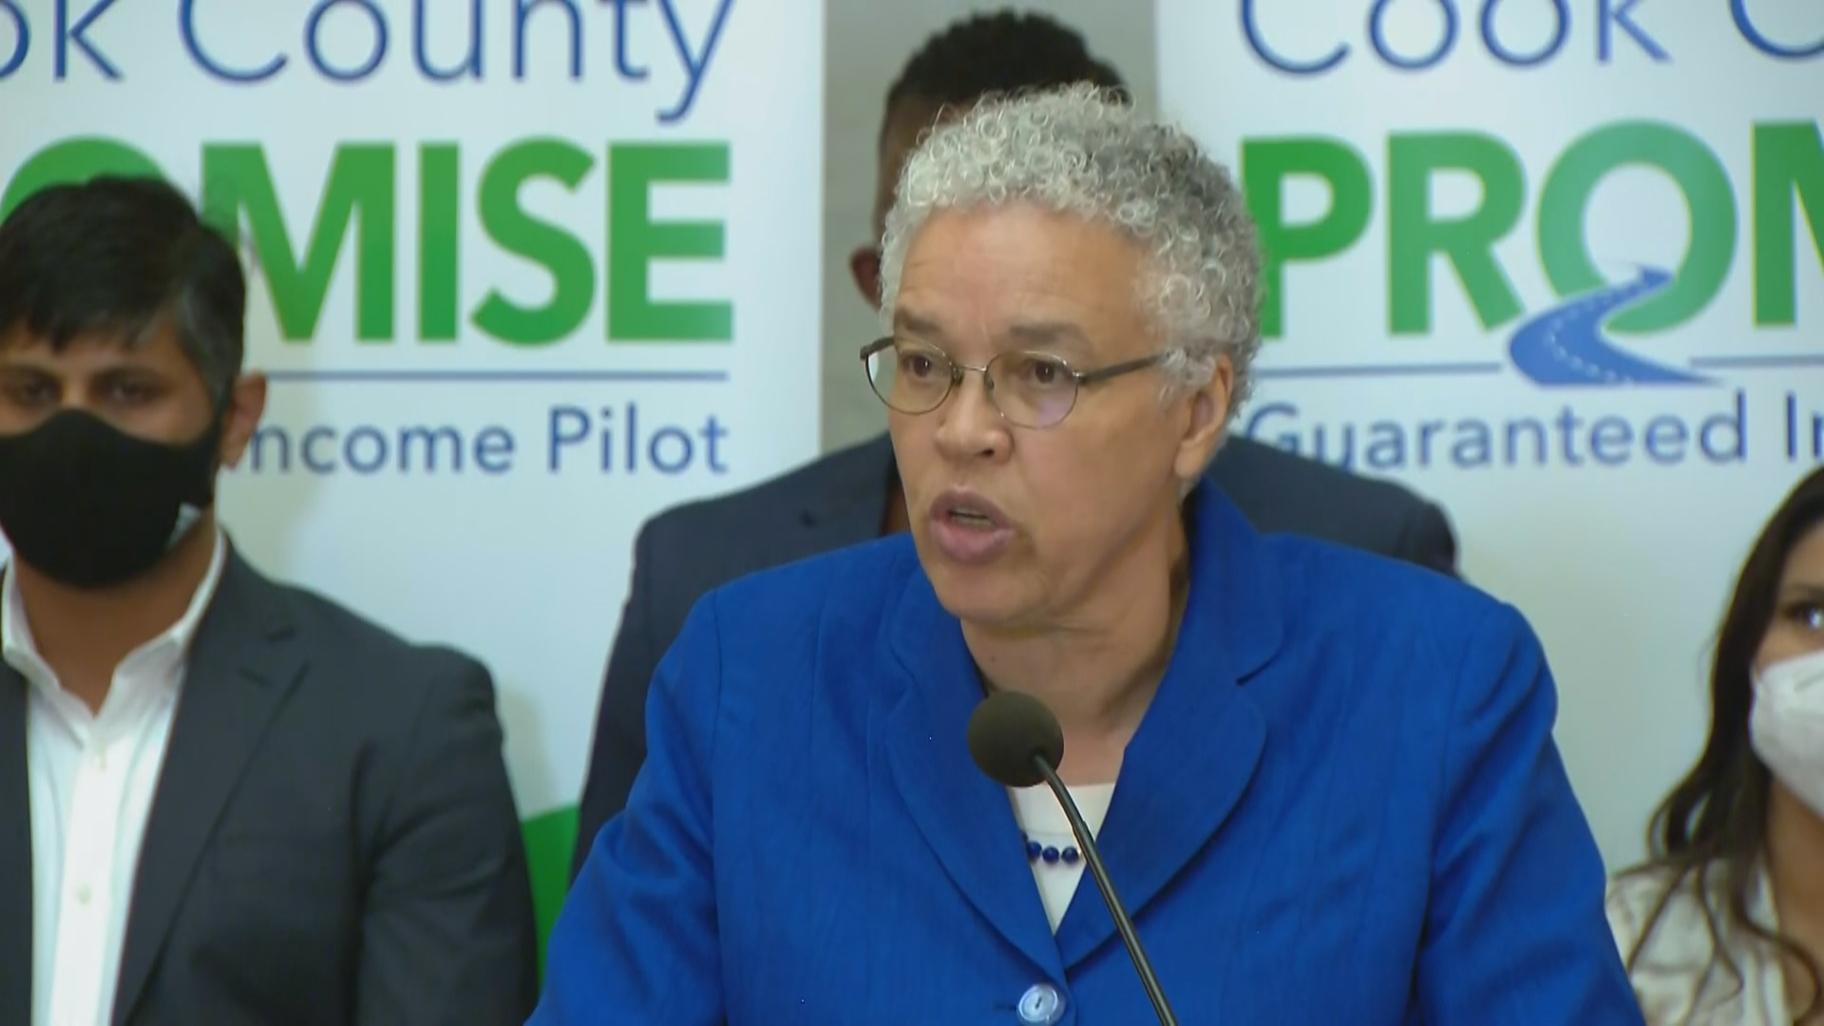 Cook County Board President Toni Preckwinkle speaks about the county’s cash assistance program on May 18, 2022. (WTTW News)